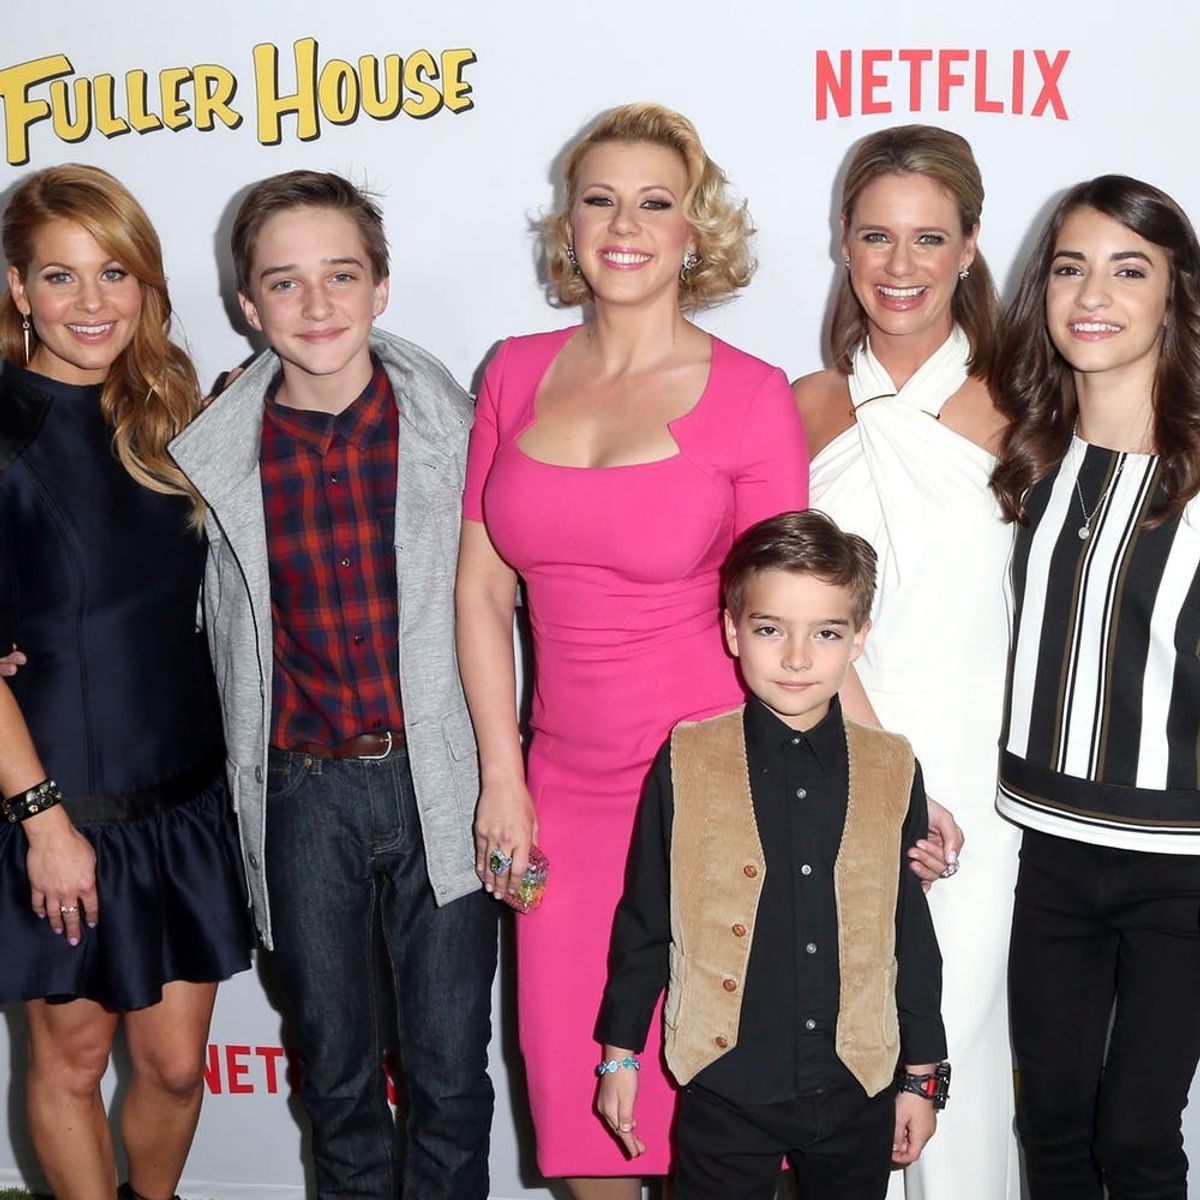 “Fuller House” Season 3 Is Coming to Netflix Soon, So Here’s Everything We Know So Far